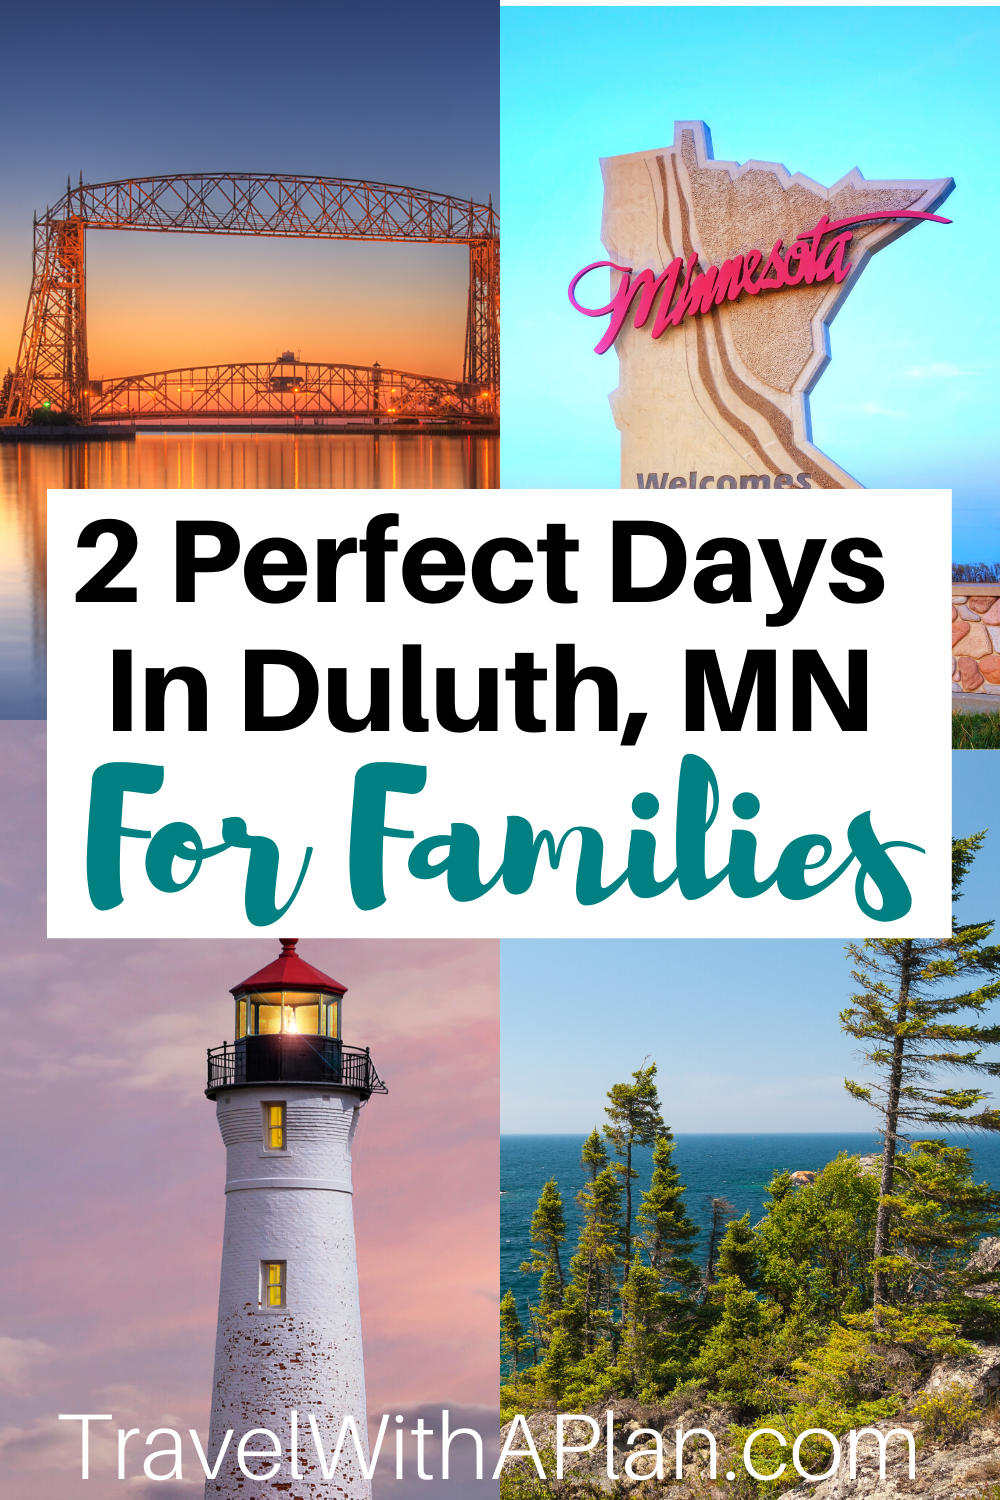 Find out exactly what to see as well as discover the best things to do in Duluth, MN!  From Canal Park, Enger Tower, and The Depot, our Duluth 2-Day Itinerary is perfect for families!  Click here now for our hour-by-hour touring plan!  #DuluthMN #thingstodoinDuuth #bestthingstodoinDuluth #Duluthwithkids #Duluth2dayitineary #2dayduluthitinerary